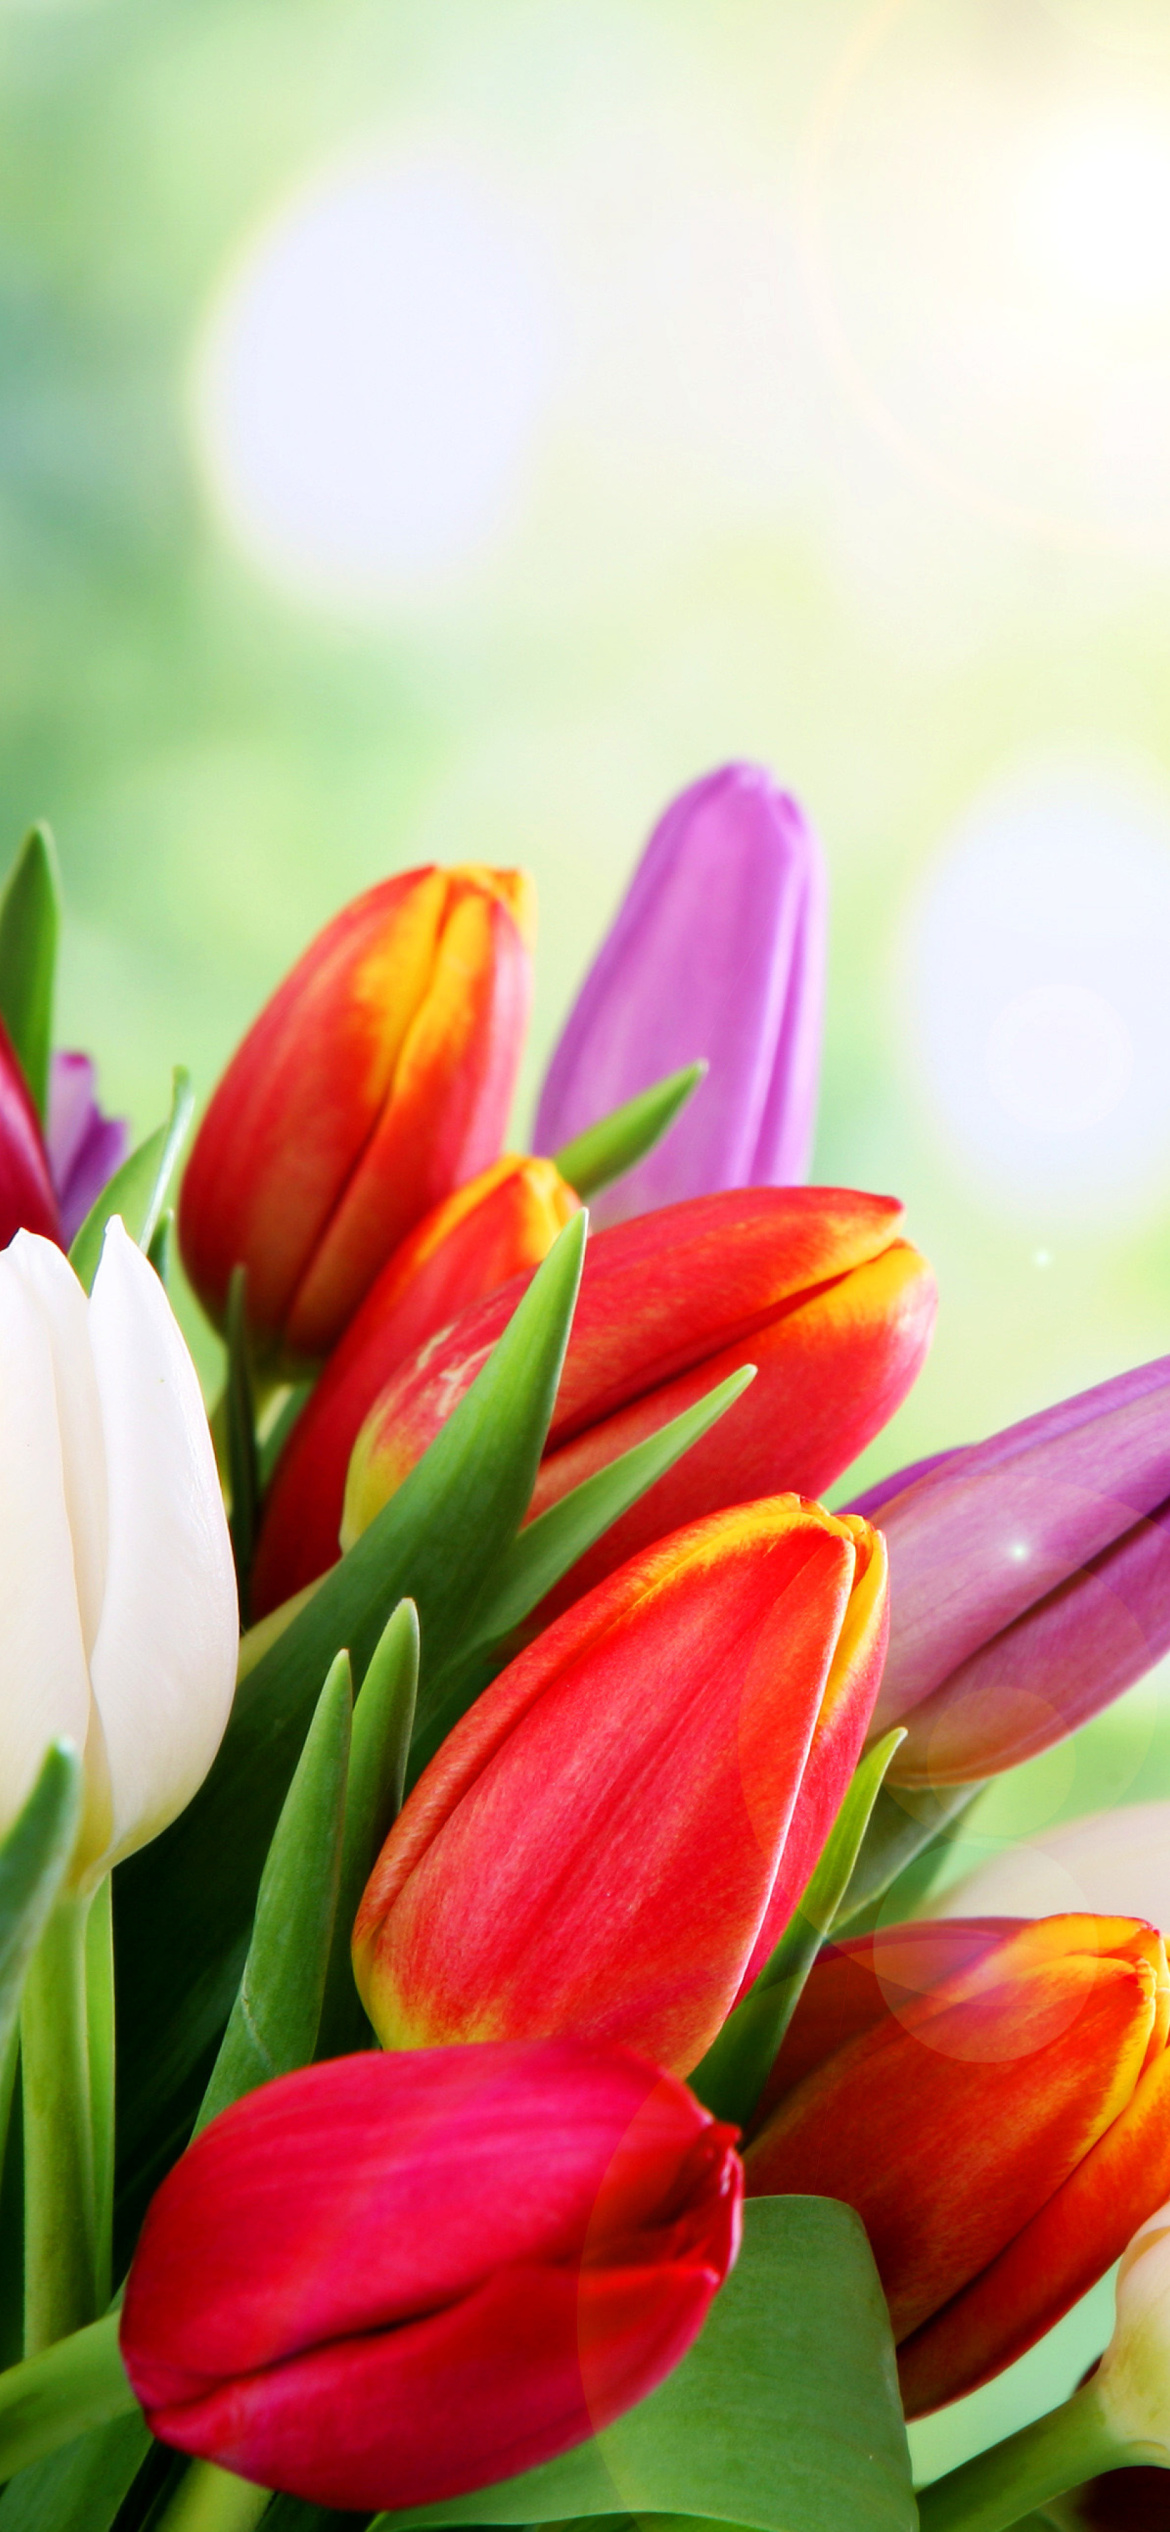 Bouquet of colorful tulips wallpaper 1170x2532